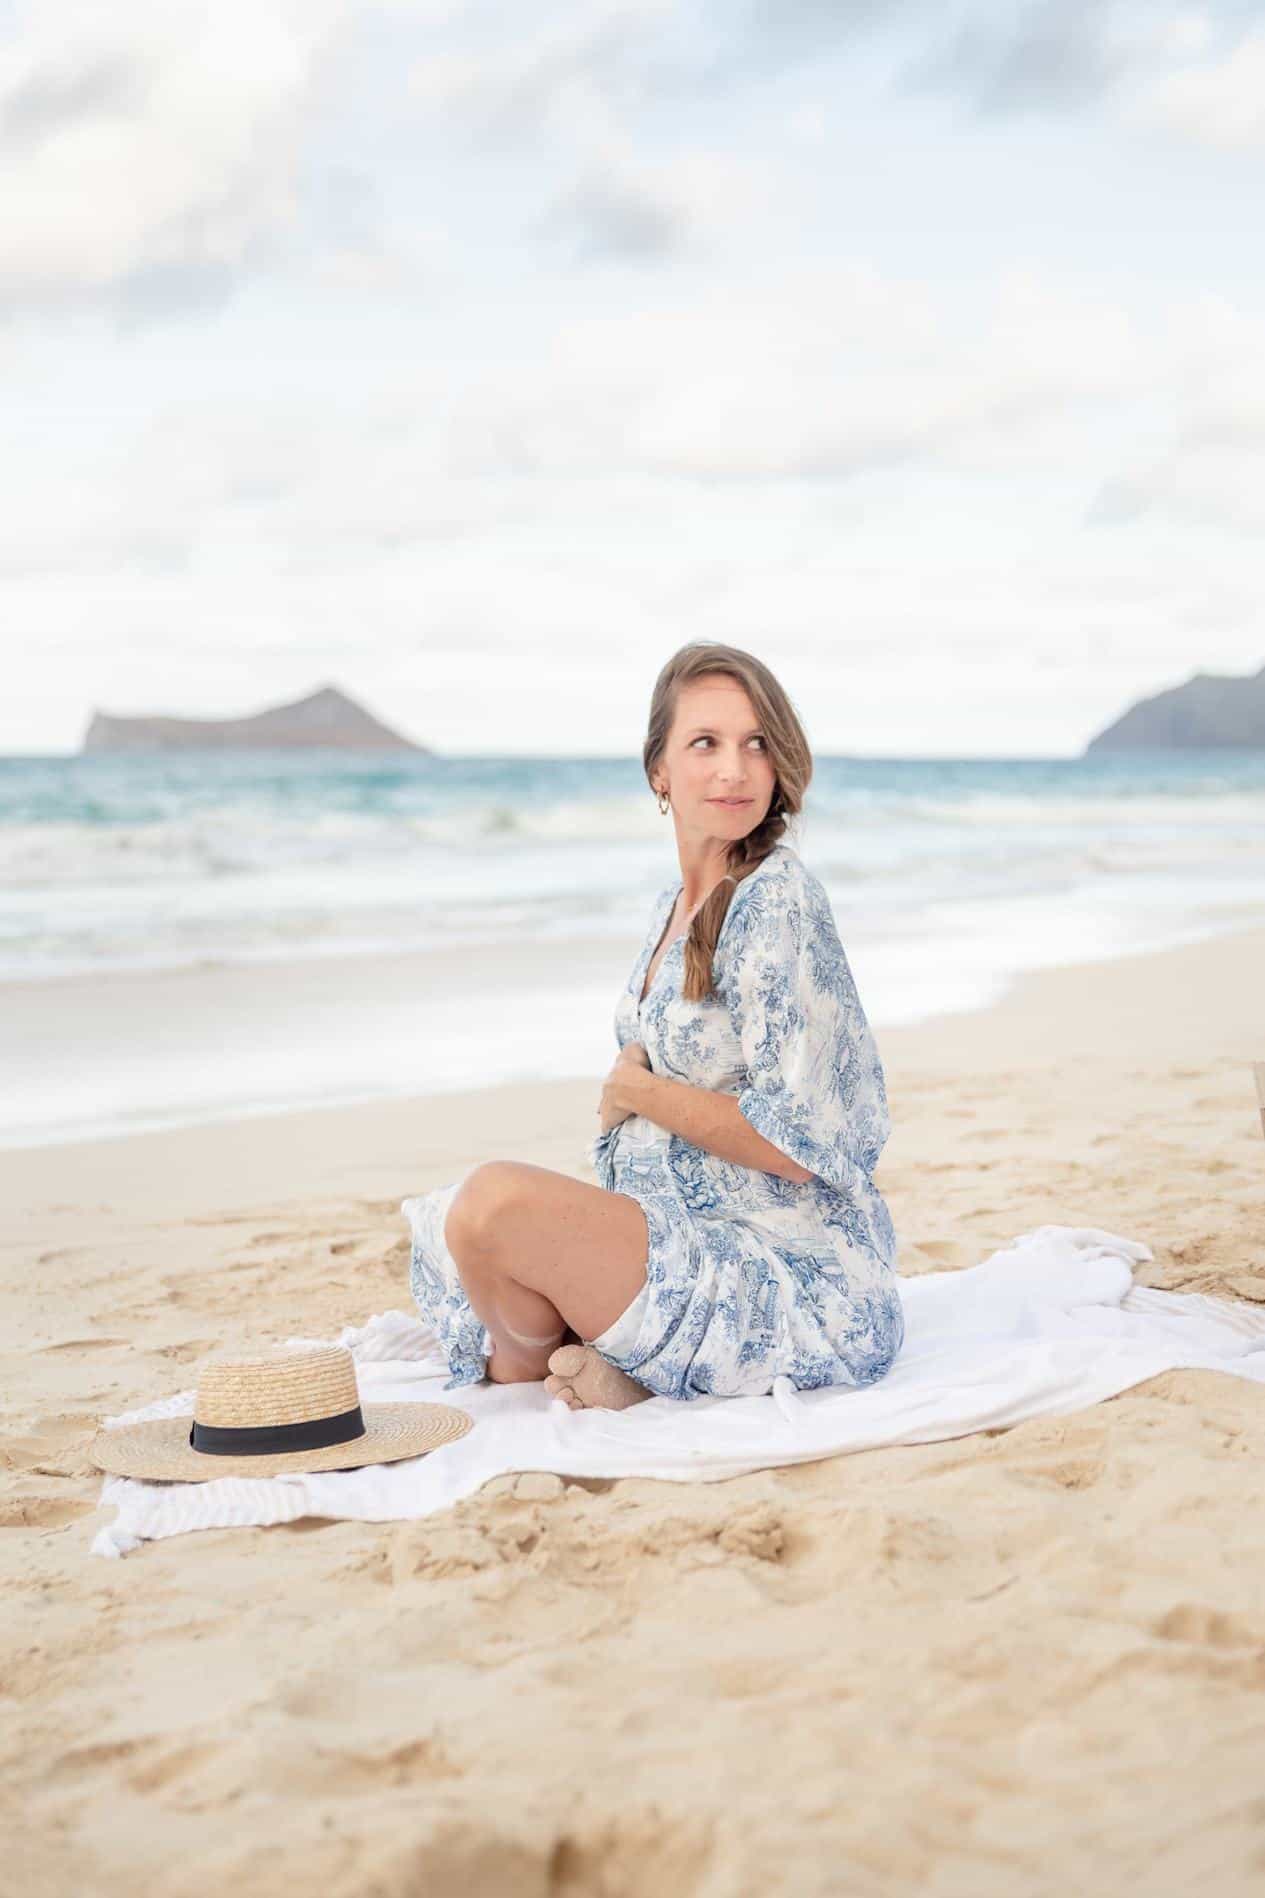 image of a woman sitting on a towel on the beach wearing a blue floral dress embracing her pregnant belly